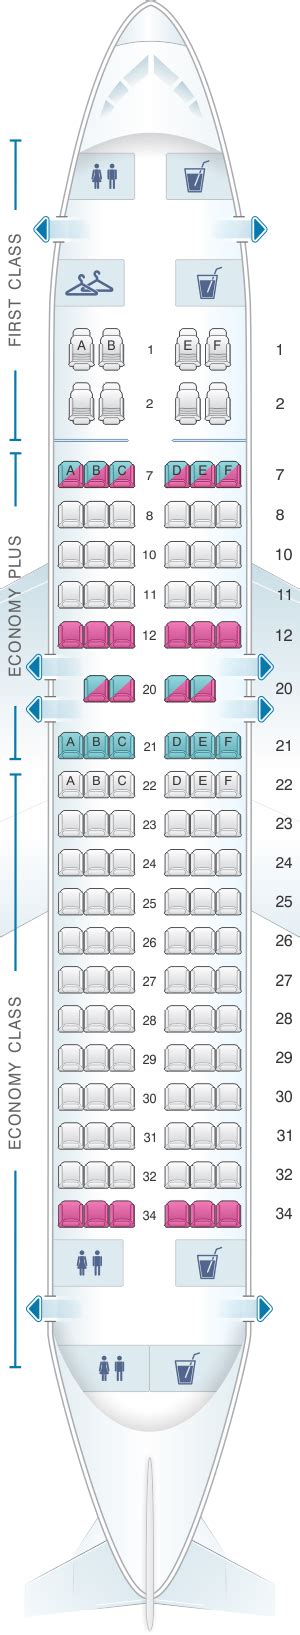 United Airbus A319 Seating